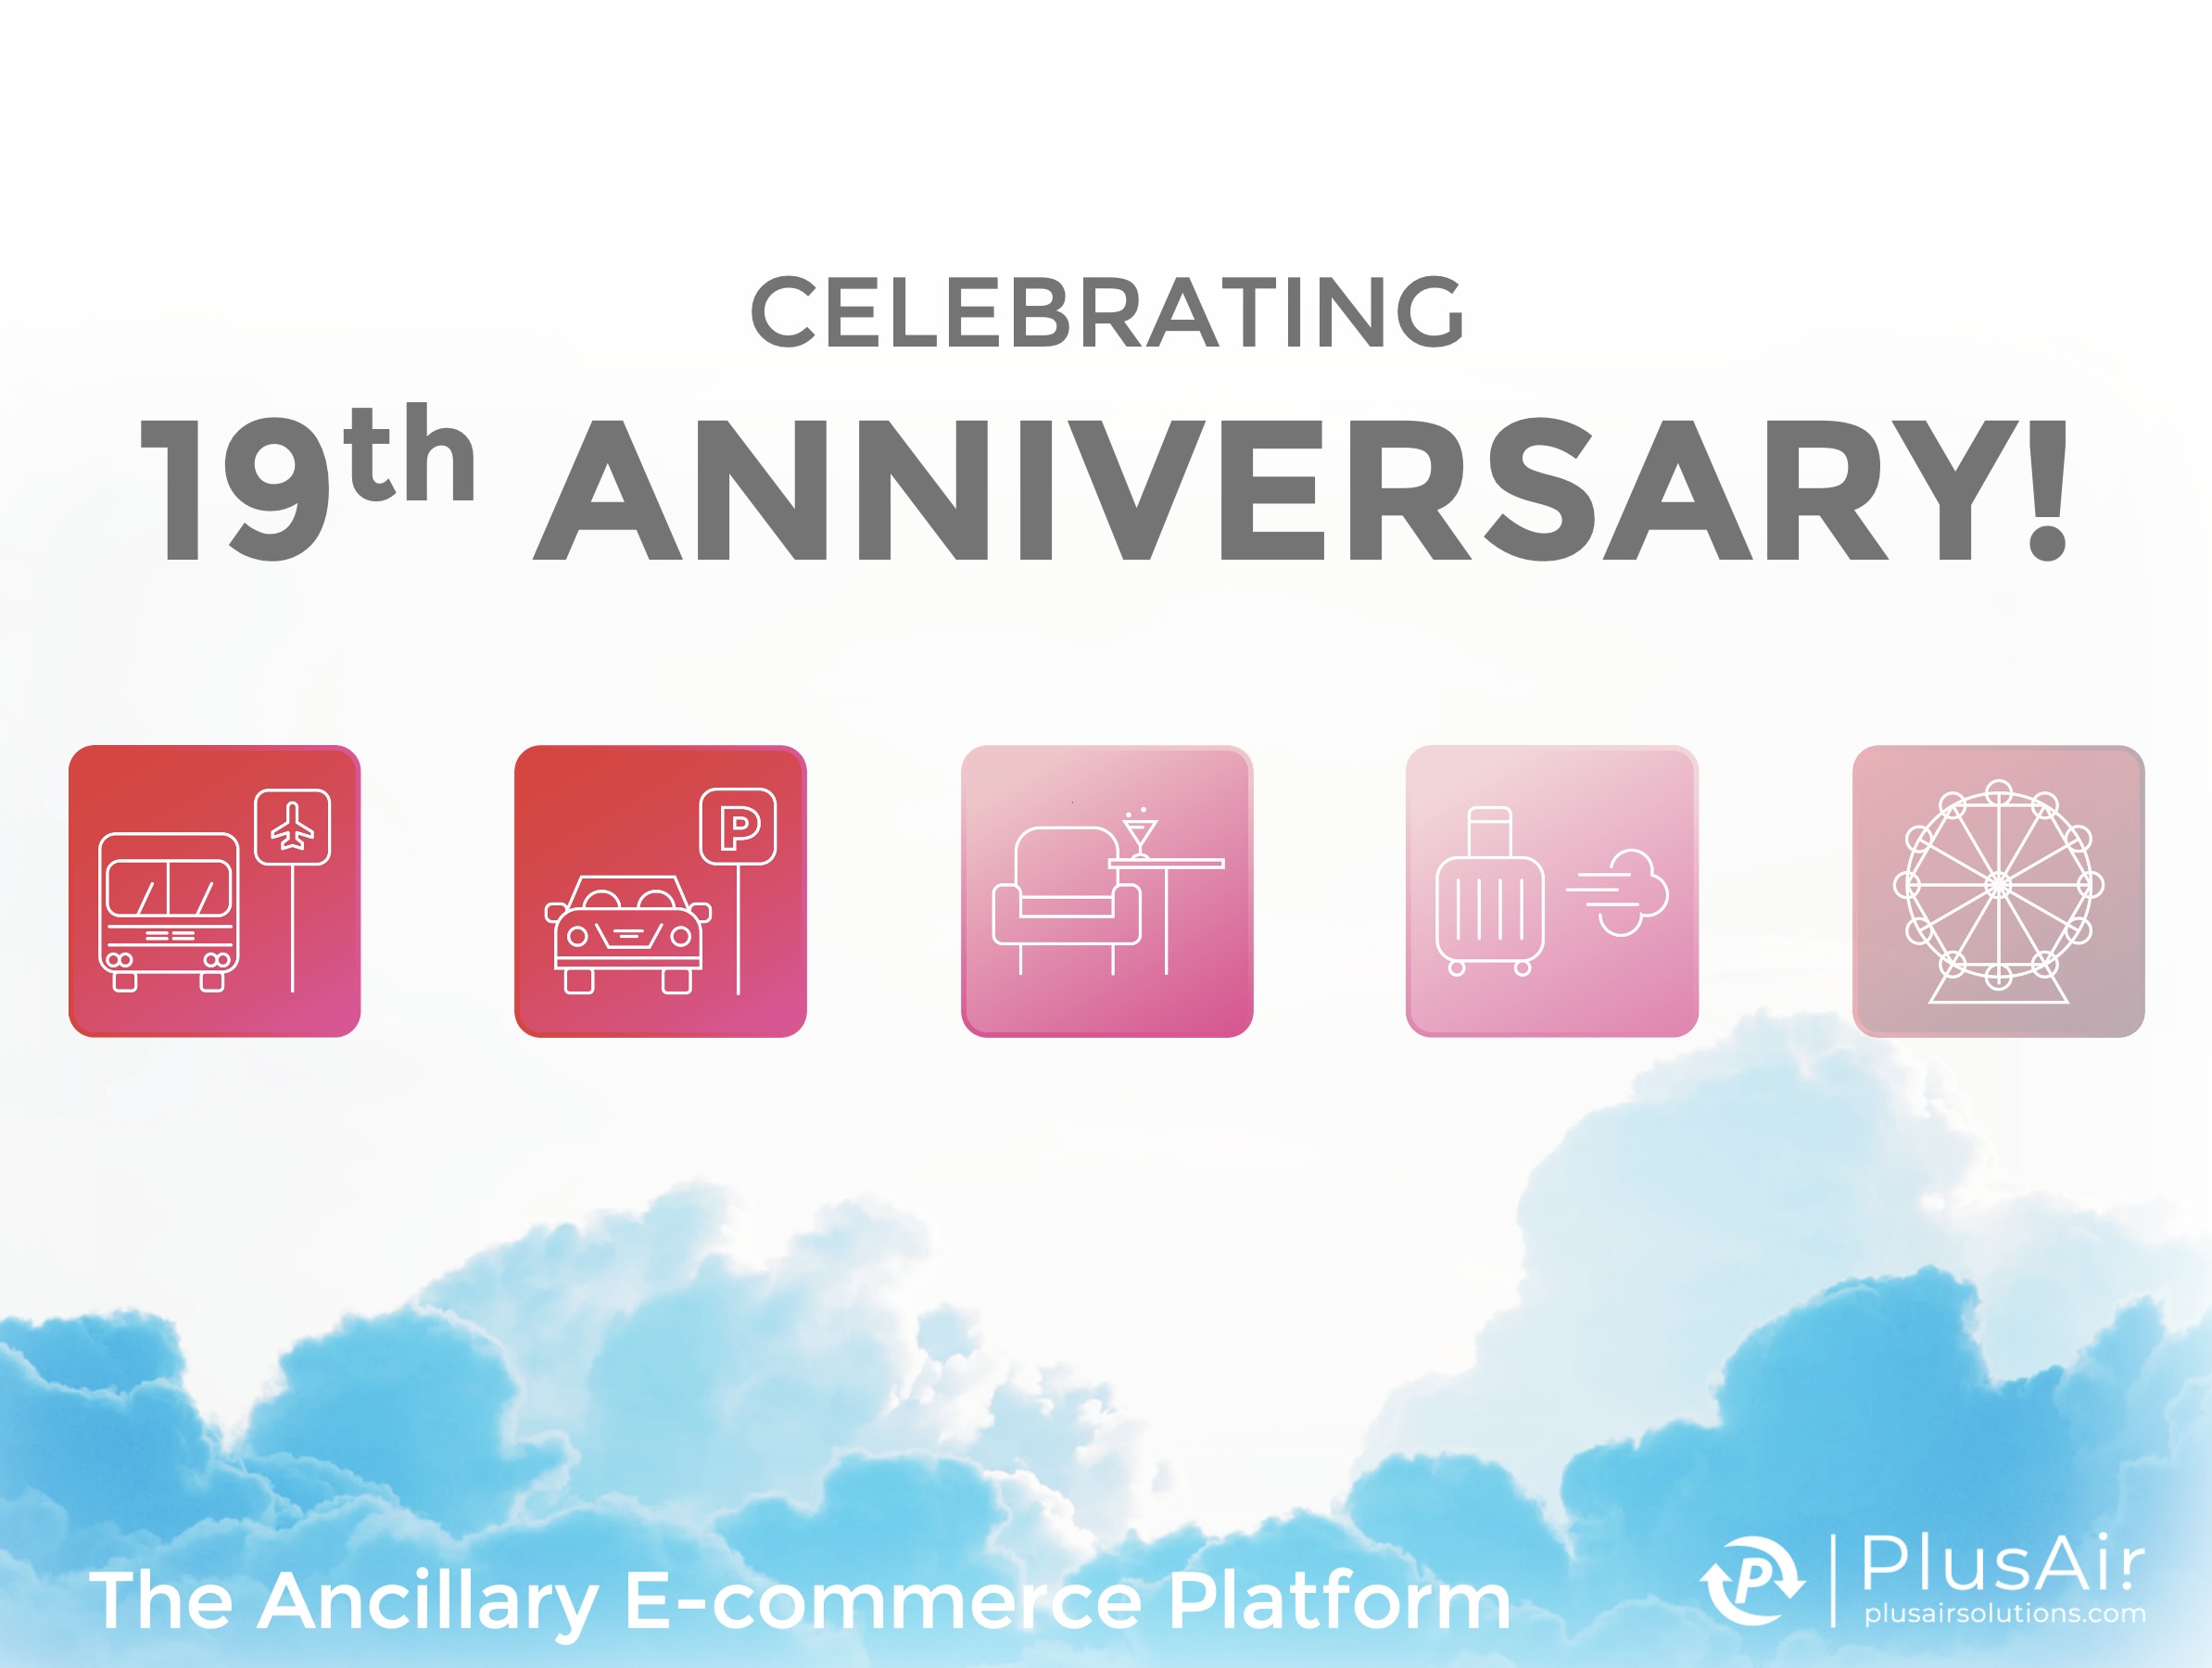 19th Anniversary in the ancillary e-commerce section